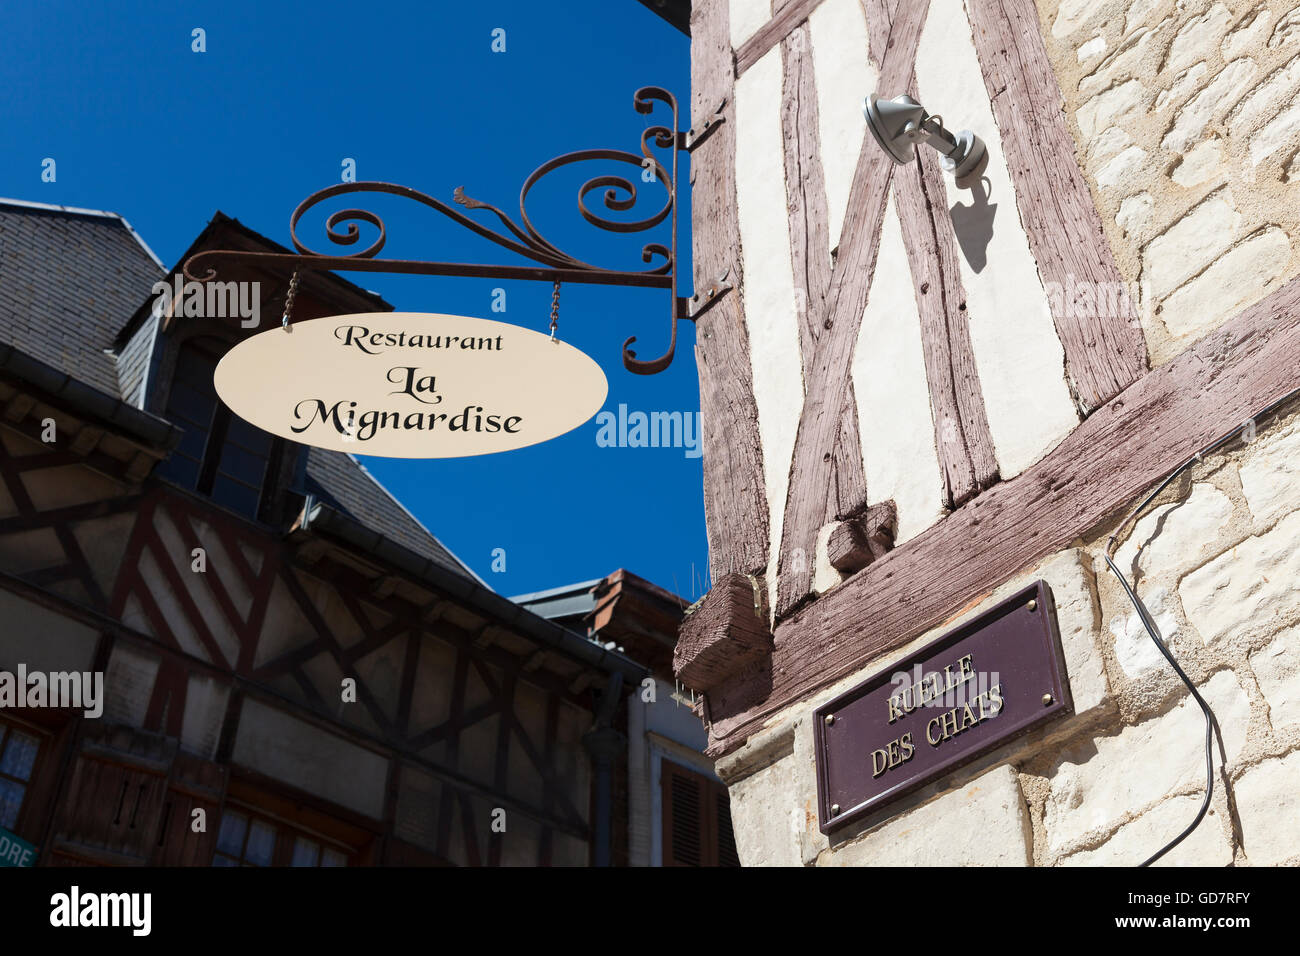 Ruelle des chats, Troyes, Aube Department, Alsace Champagne-Ardenne Lorraine region, France Stock Photo